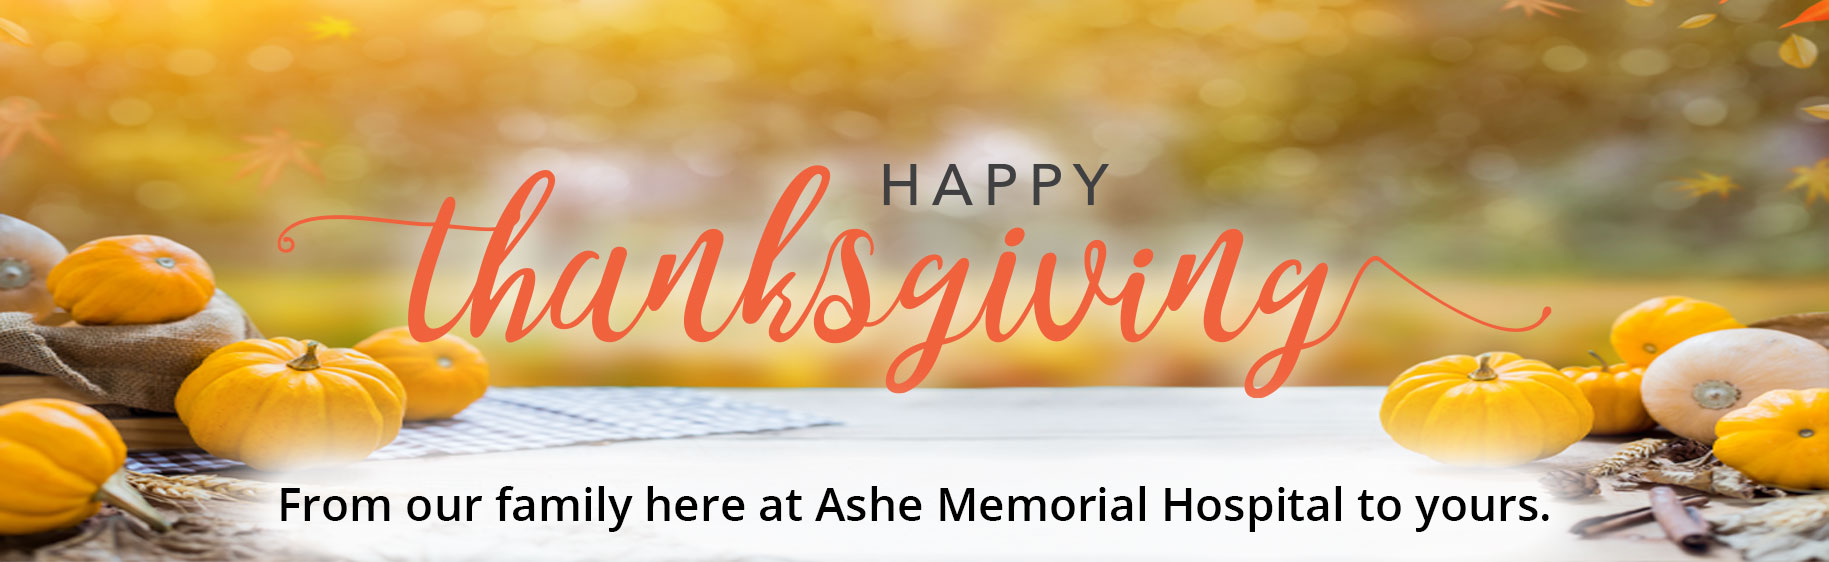 Thanksgiving themed banner with pumpkins on a table with a faded background 

Banner says:
HAPPY Thanksgiving
From our family here at Ashe Memorial Hospital to yours